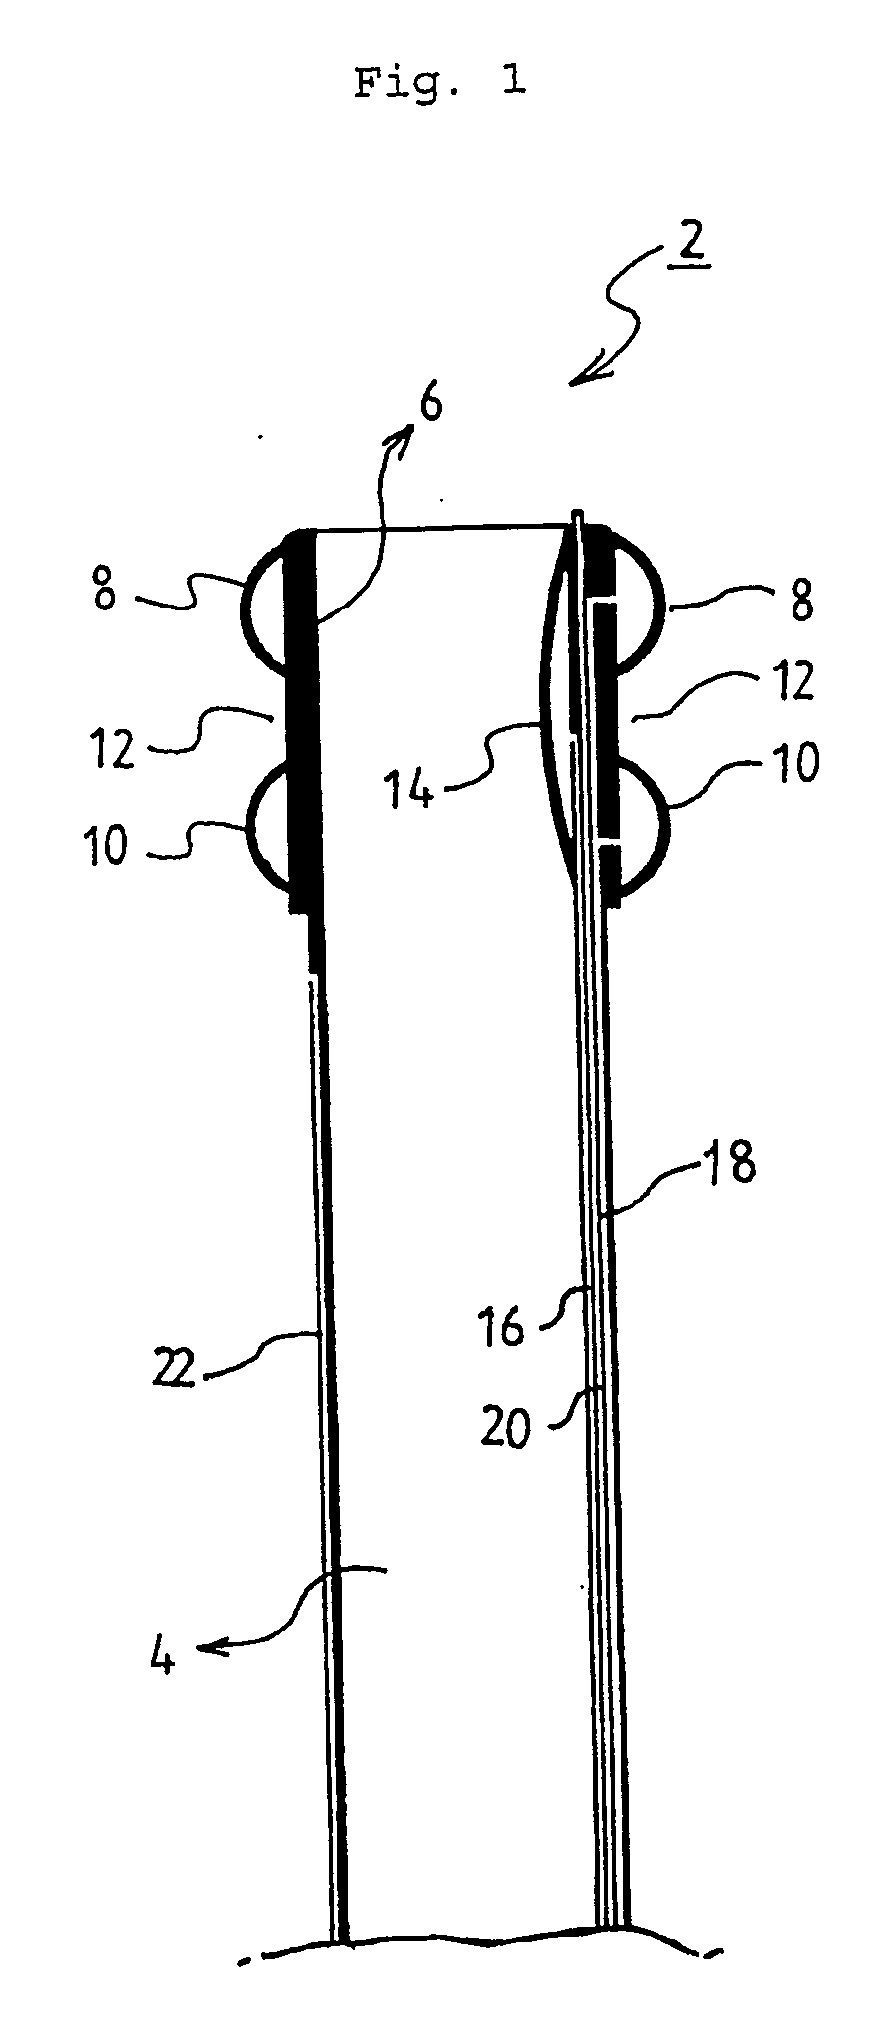 Indwelling fecal diverting device